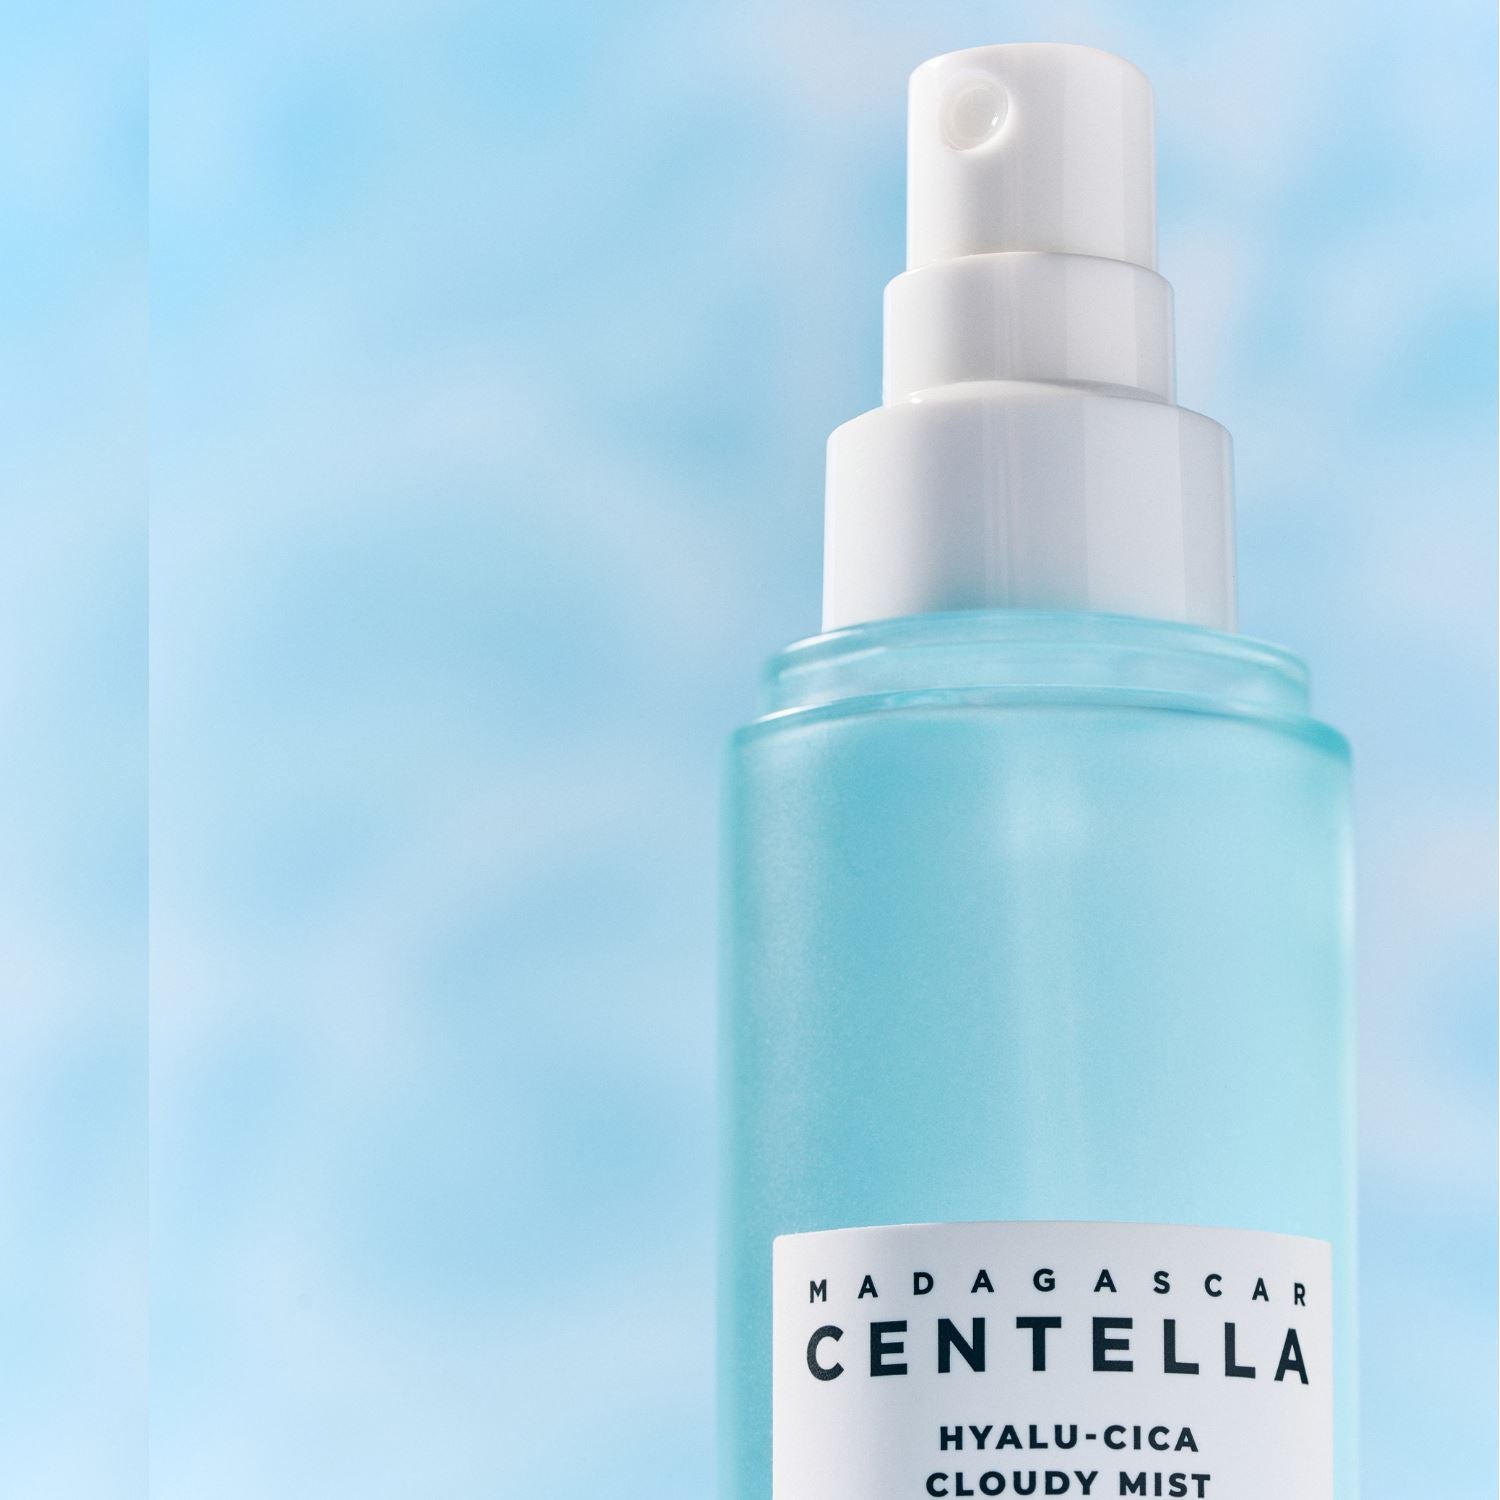 SKIN1004 Madagascar Centella Hyalu-Cica Hydration Set, at Orion Beauty. SKIN1004 Official Sole Authorized Retailer in Sri Lanka!